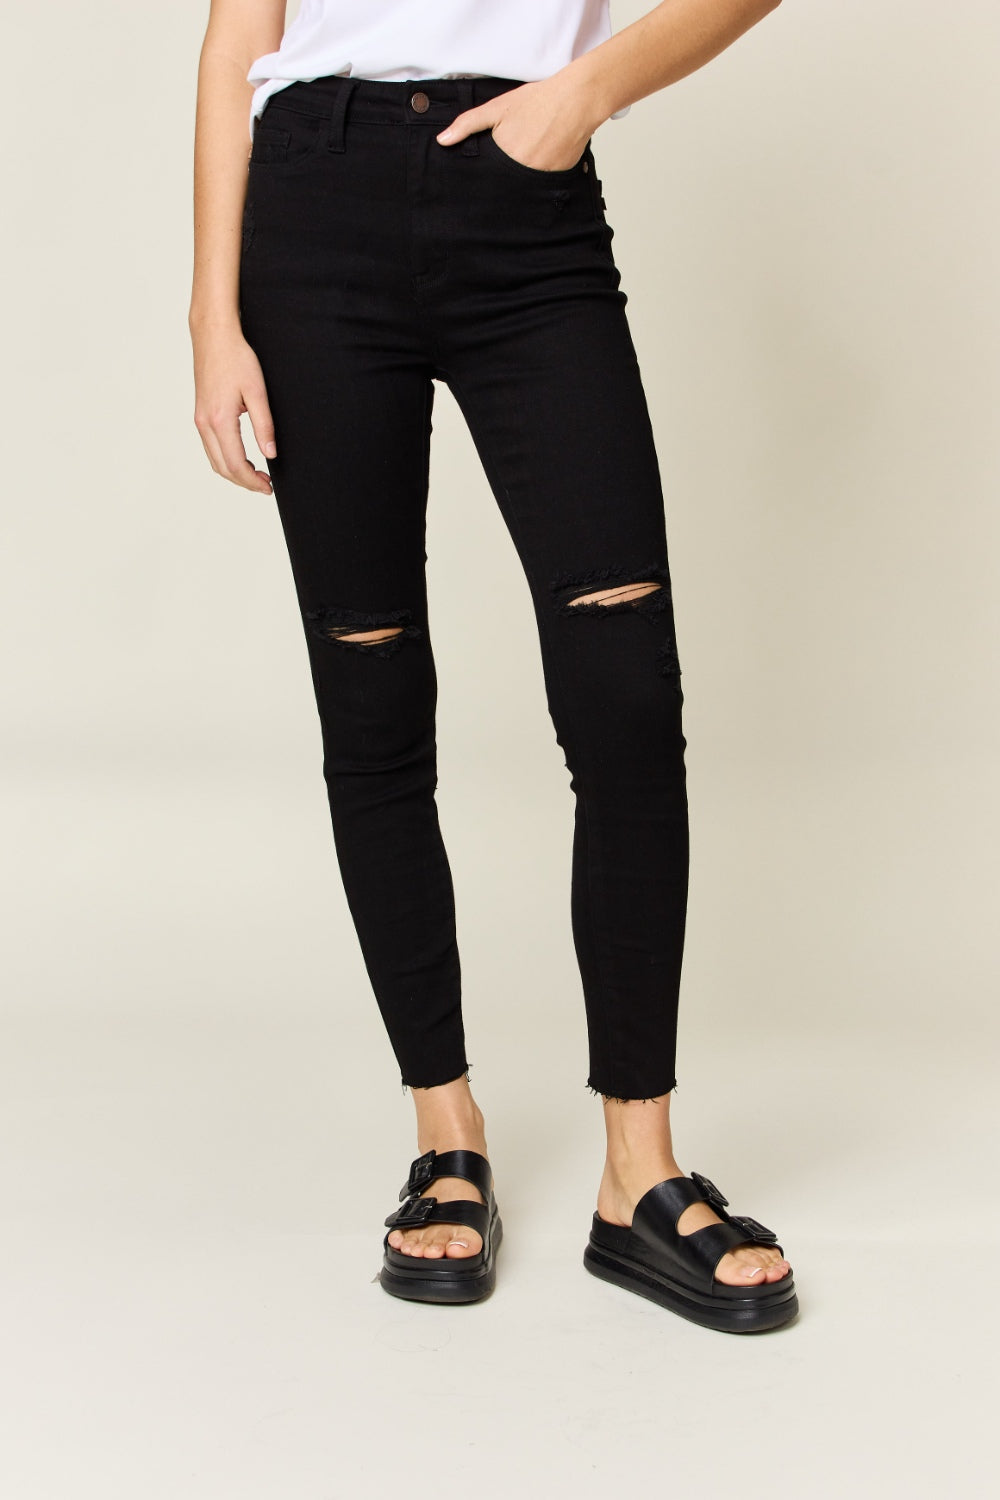 Explore More Collection - Judy Blue Full Size Distressed Tummy Control High Waist Skinny Jeans